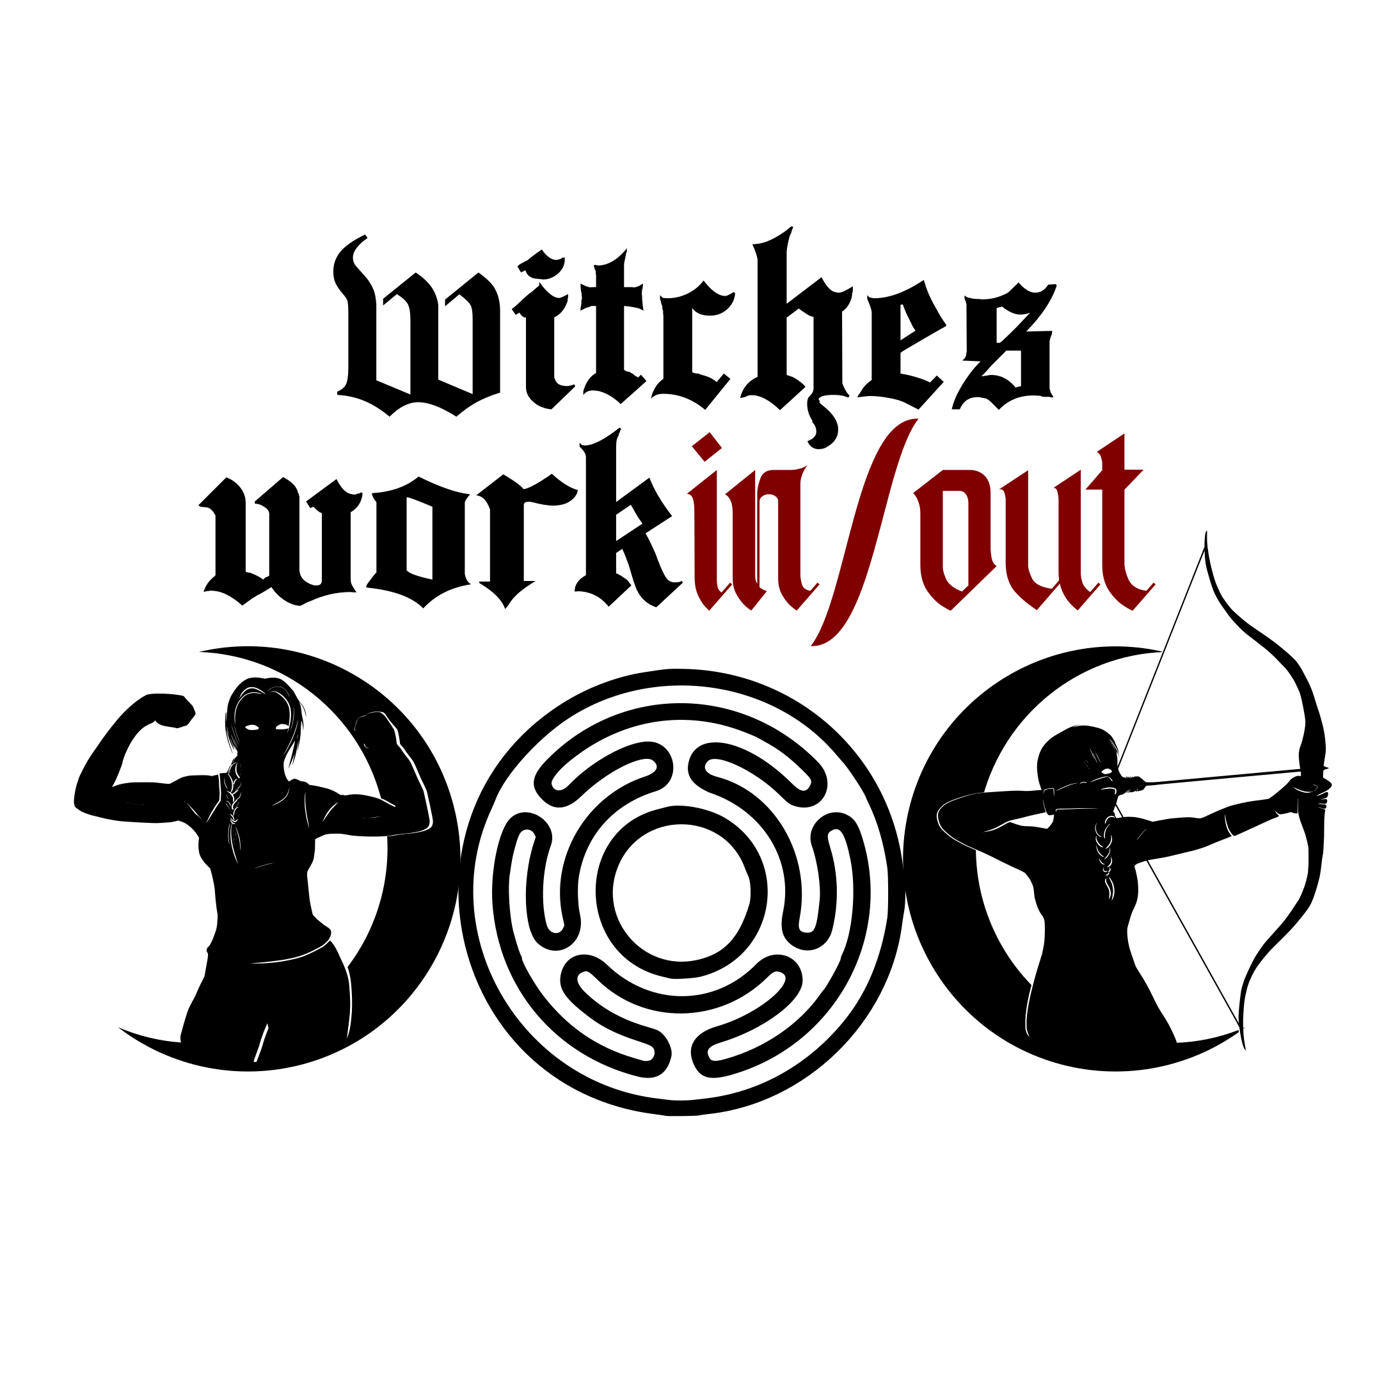 Witches Workin/out